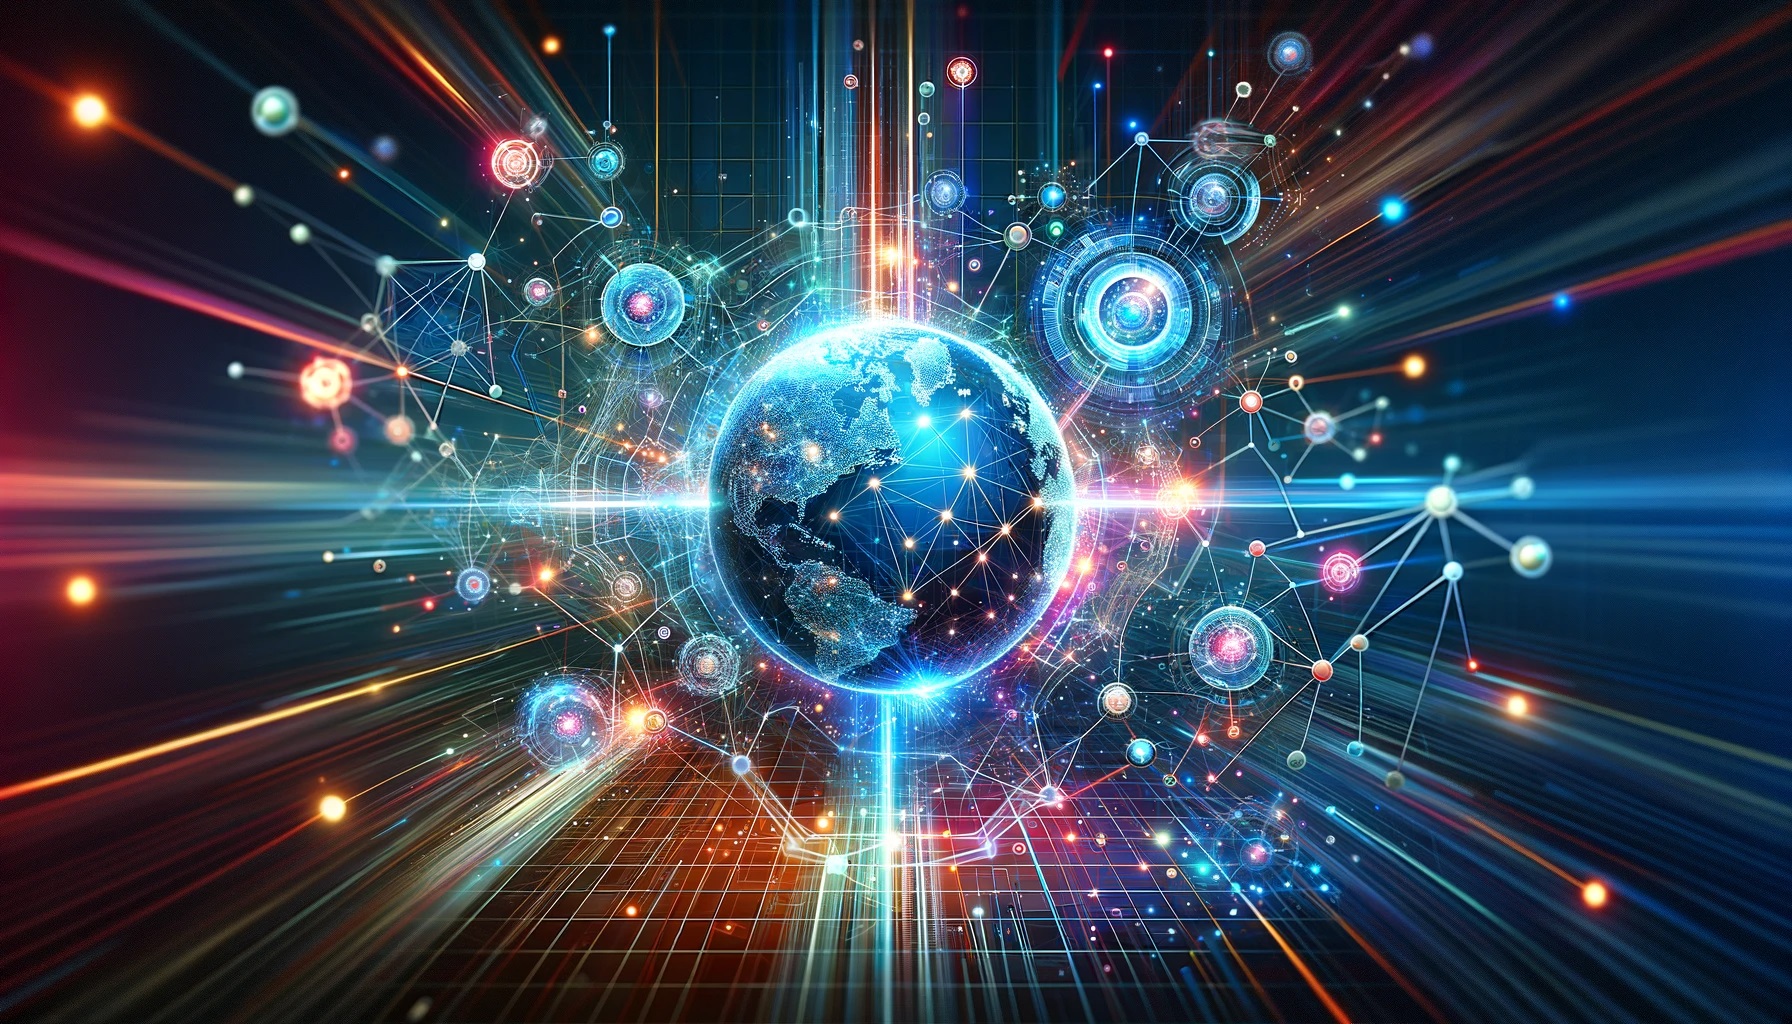 Wide image showcasing a futuristic SEO and digital marketing concept with a central glowing globe symbolizing global connectivity, surrounded by an interconnected network of nodes, lines, and data streams in a vibrant, digital cyberspace.